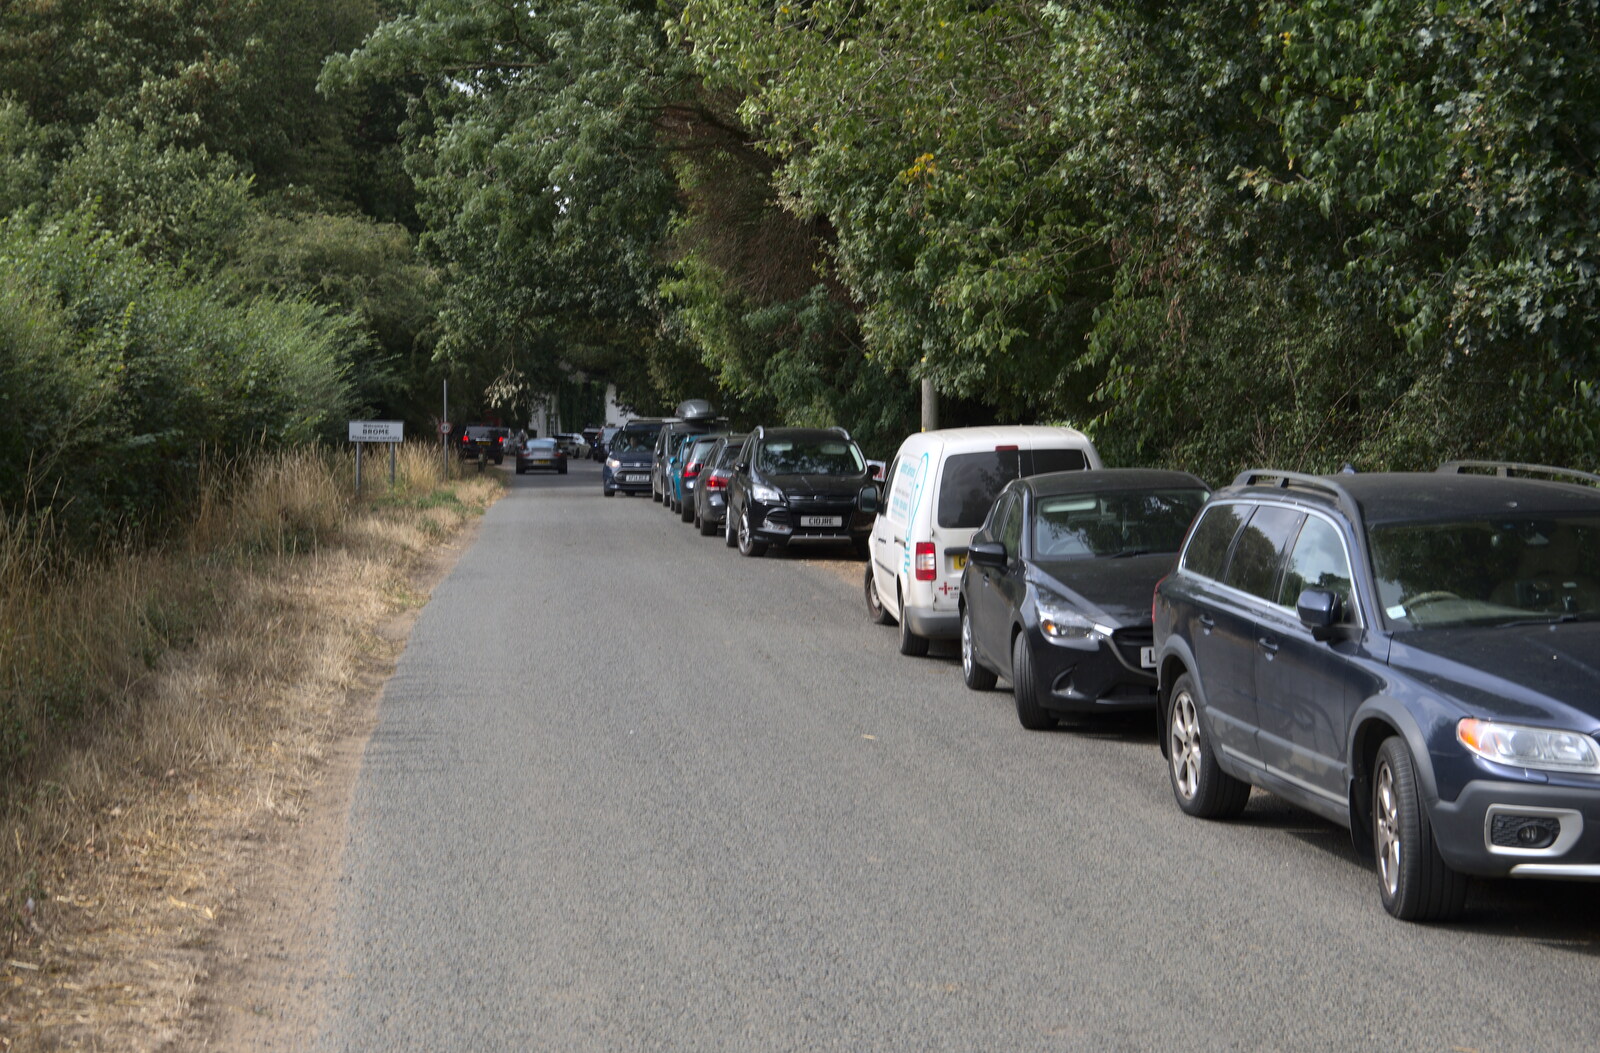 Italian Cars and a Royal Proclamation, Eye, Suffolk - 11th September 2022: It's like rush hour on Brome Street